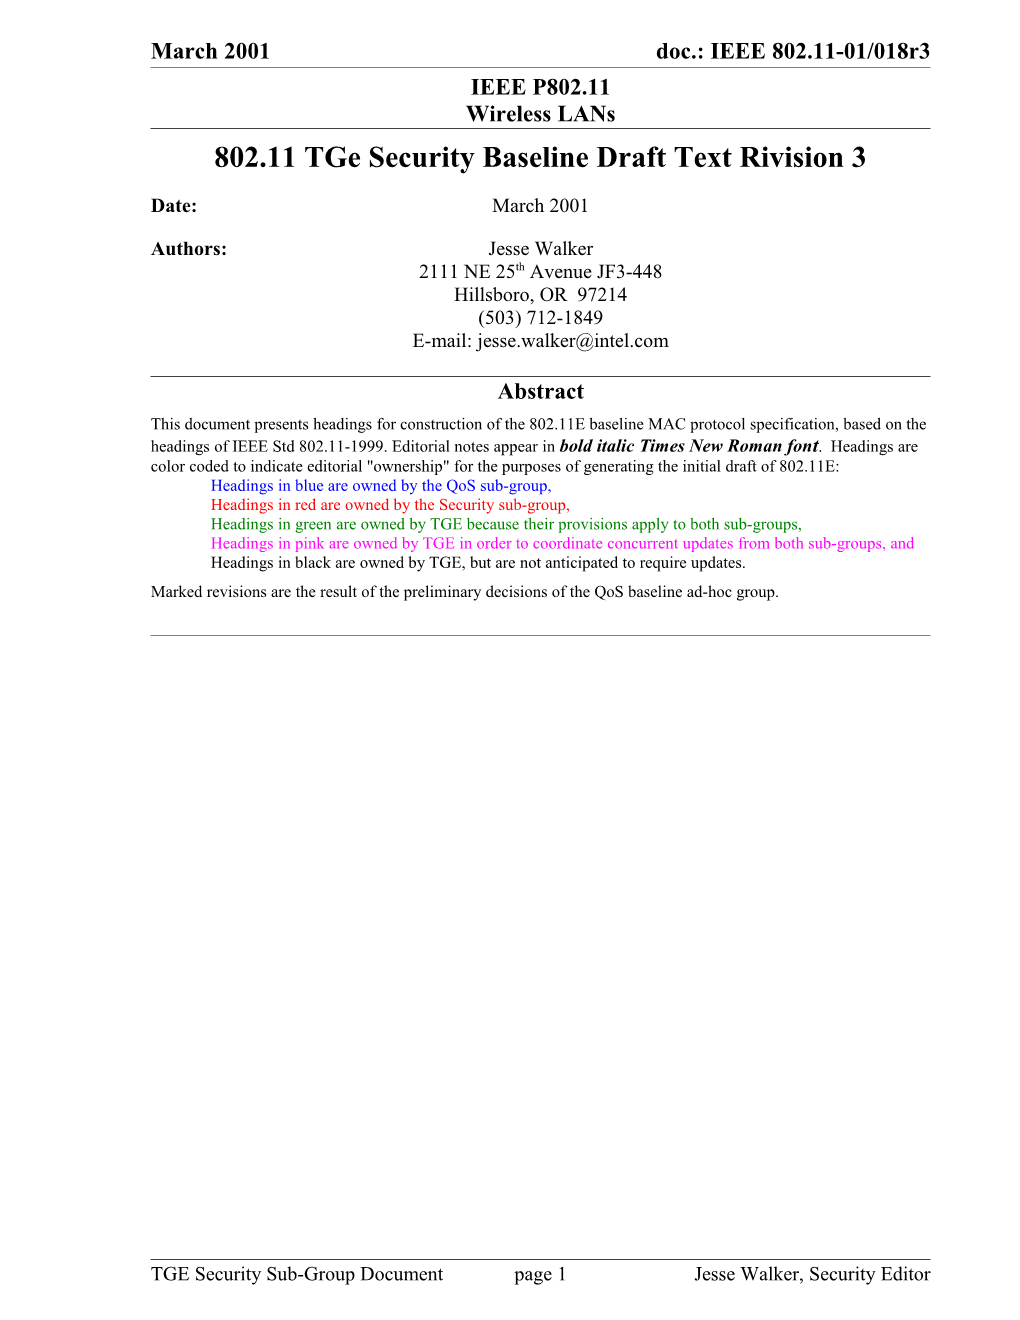 802.11 Tge Security Baseline Draft Text Rivision 13